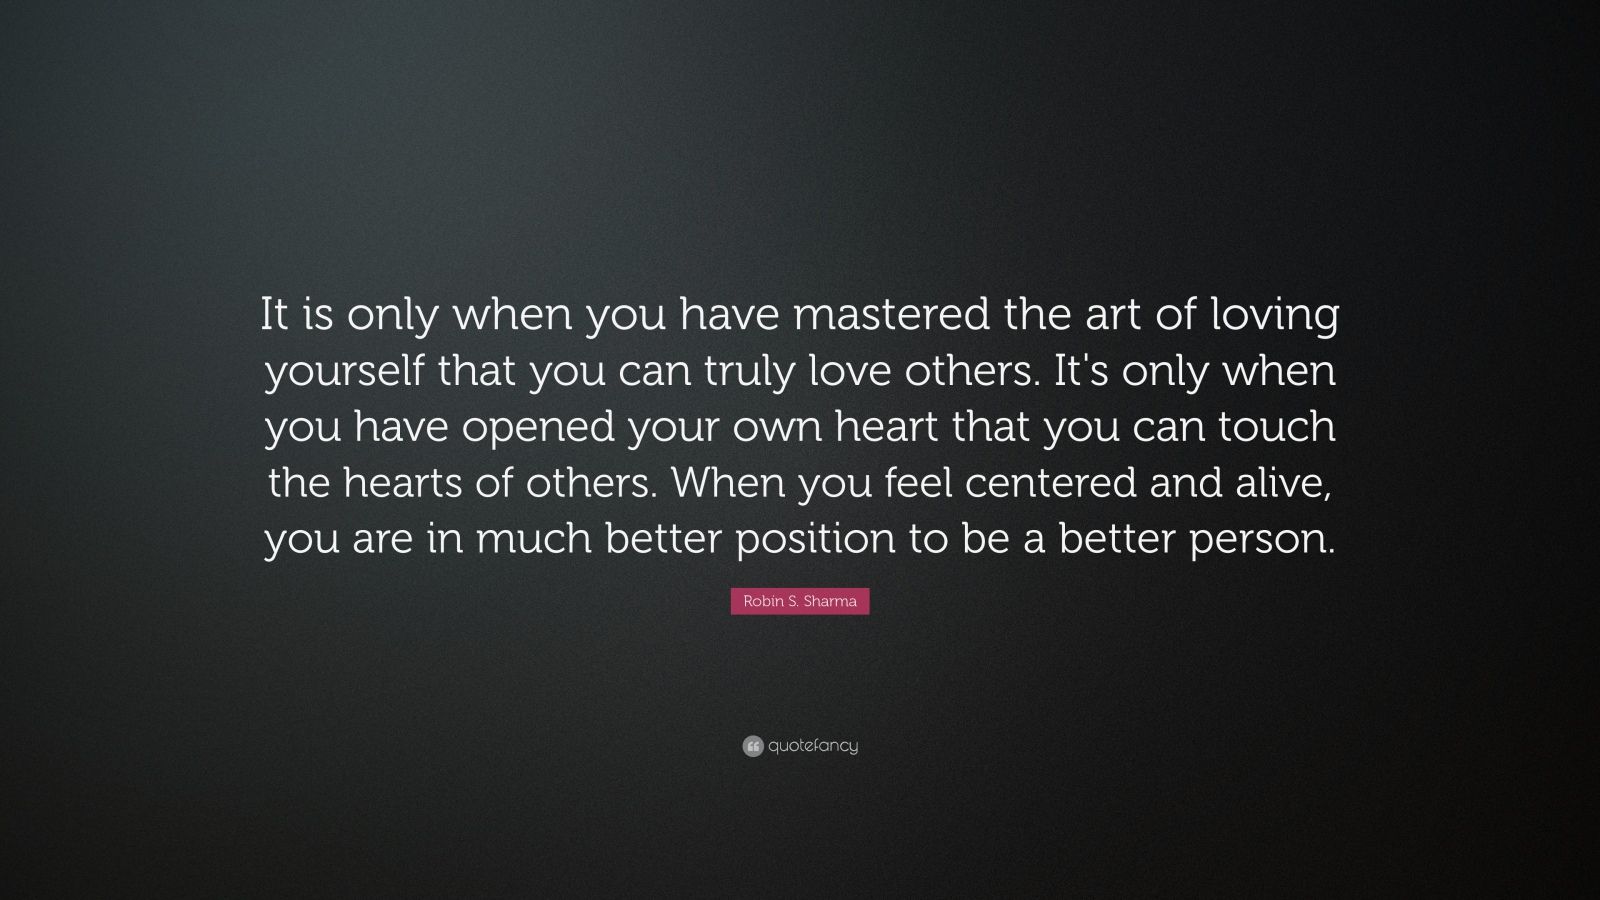 Robin S Sharma Quote “It is only when you have mastered the art